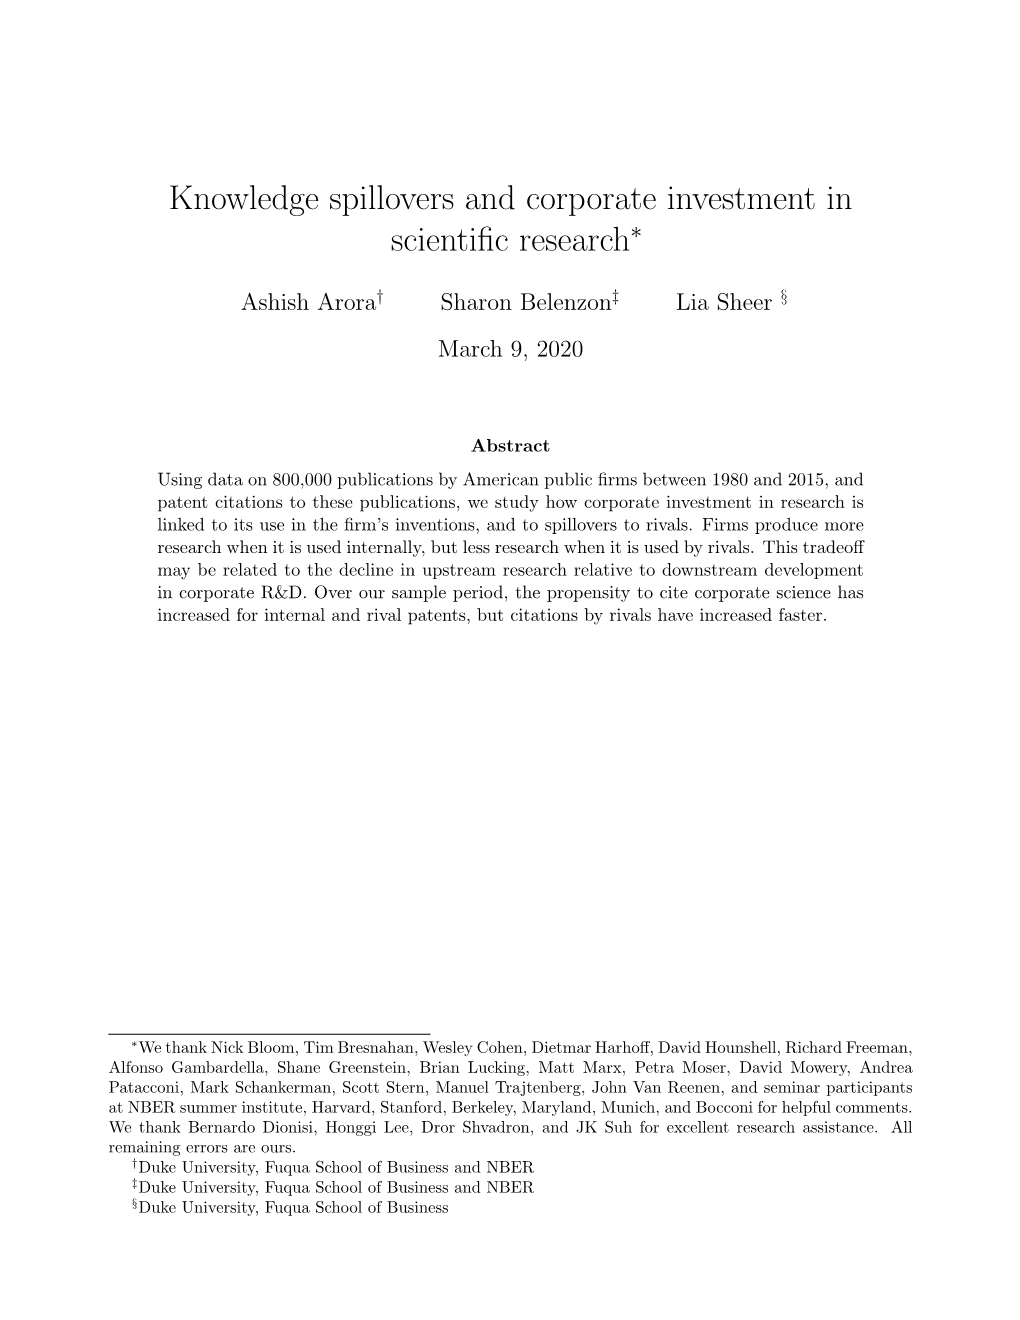 Knowledge Spillovers and Corporate Investment in Scientific Research” / A